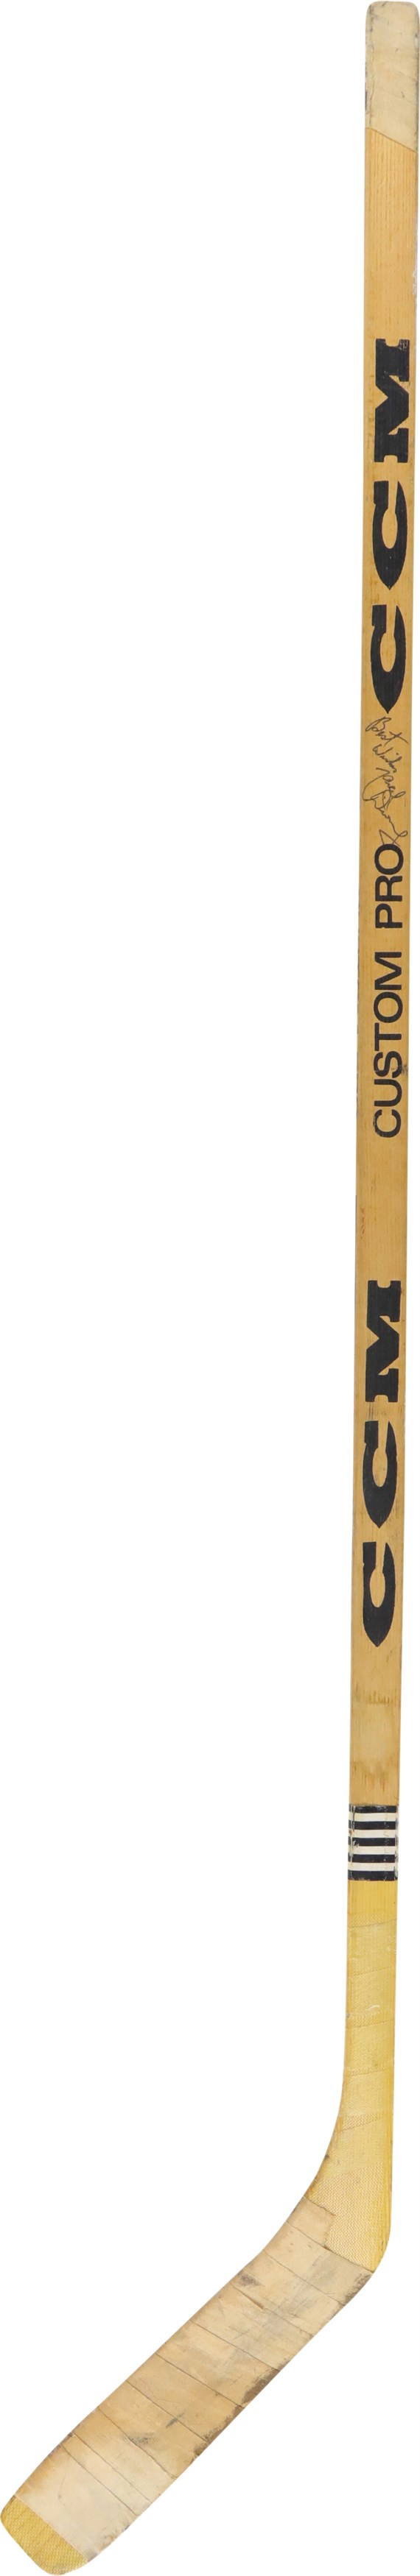 Hockey - 1979-80 Marcel Dionne Los Angeles Kings Game Used Stick